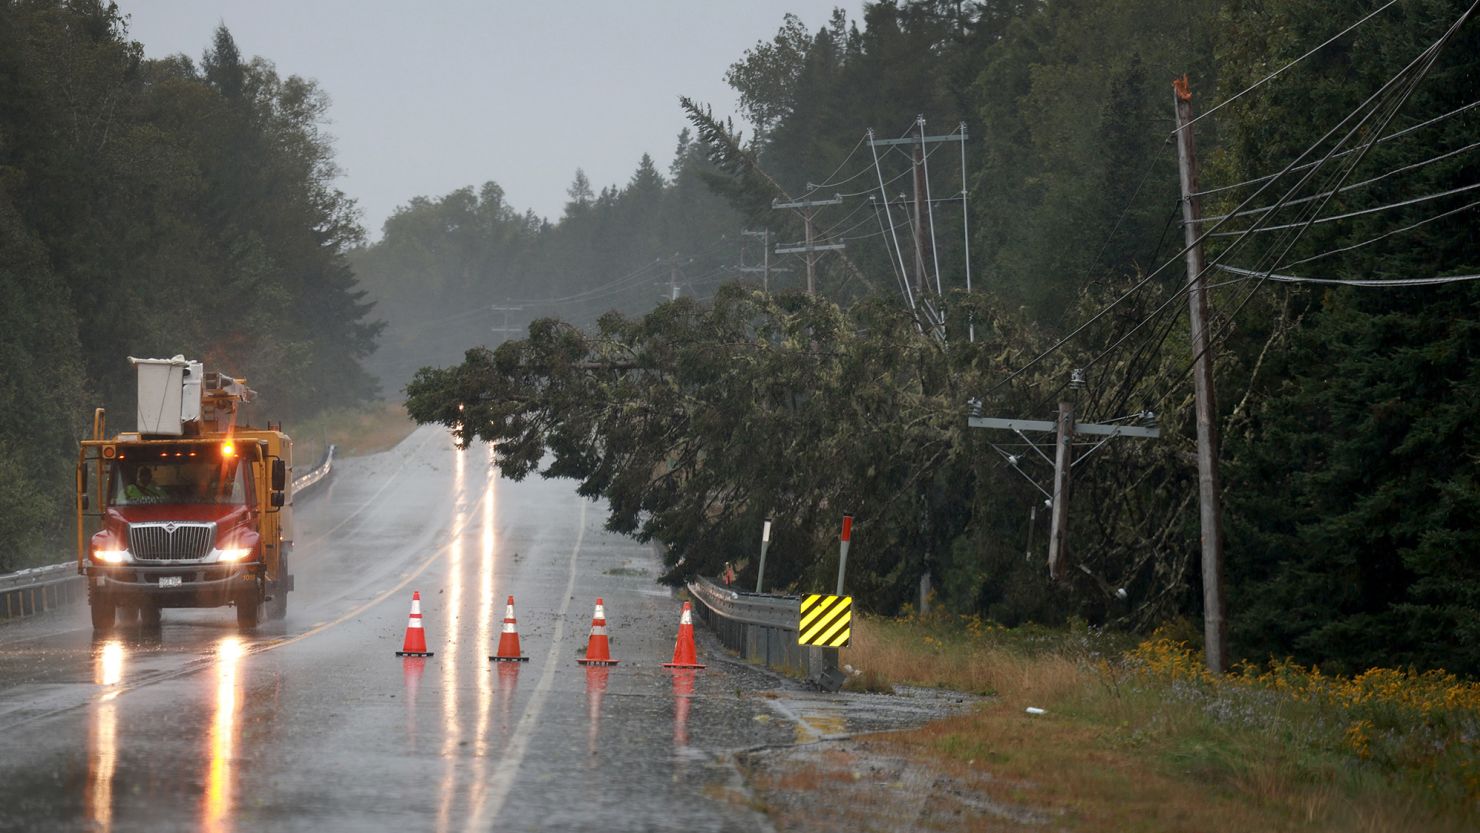 EASTPORT, MAINE - SEPTEMBER 16: A pine tree lays on power lines after it was knocked over due to Post-Tropical Cyclone Lee on September 16, 2023 in Eastport, Maine. Formerly a hurricane, the storm was downgraded, but forecasters say it will remain large and dangerous. (Photo by Joe Raedle/Getty Images)